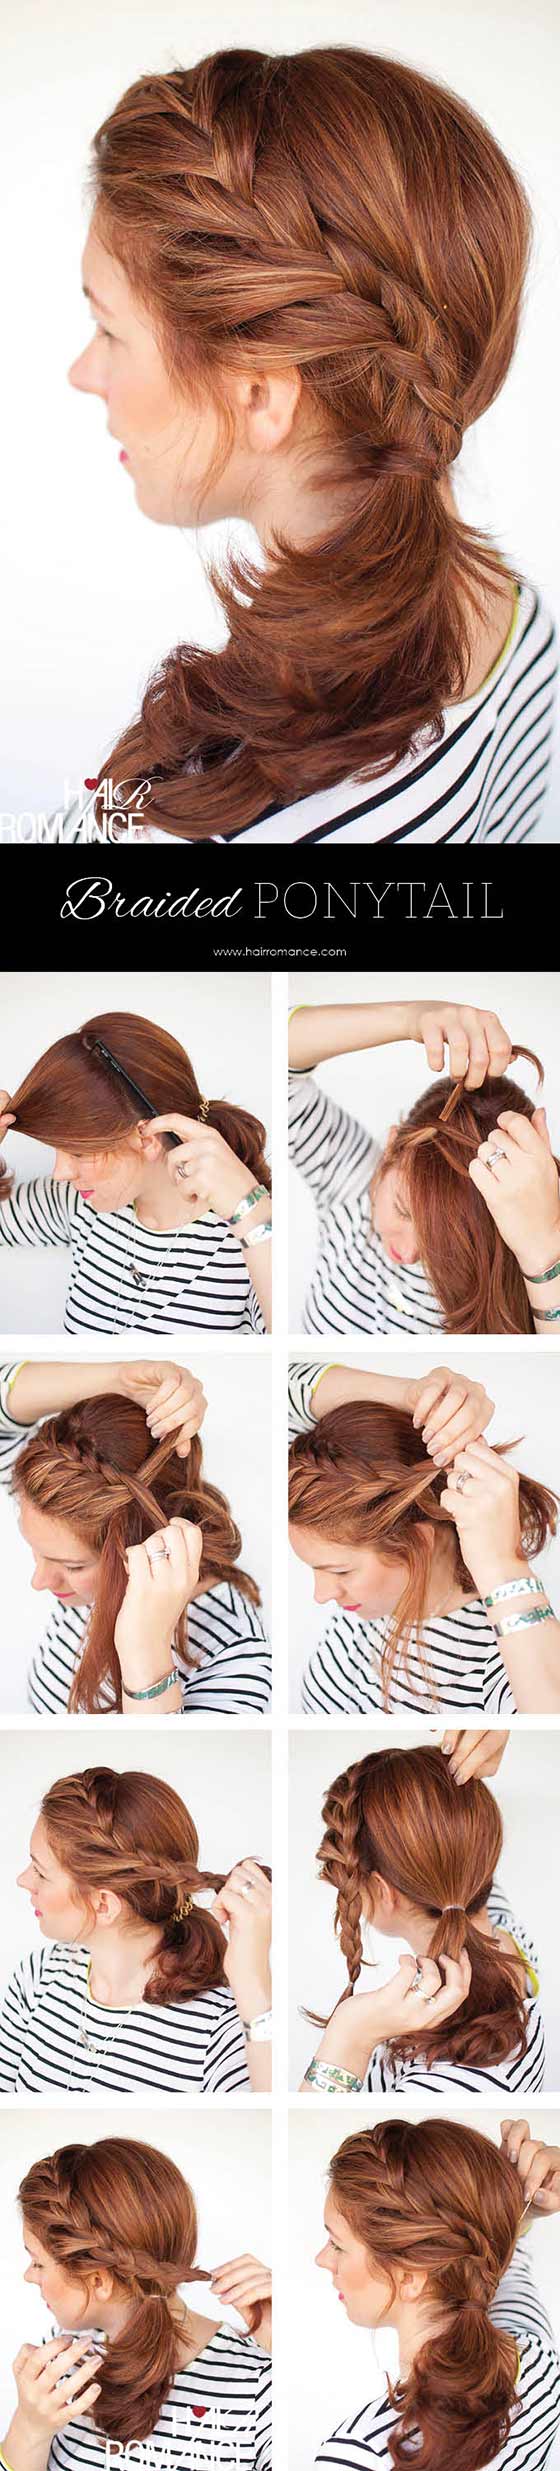 Braided headband side ponytail for long hair